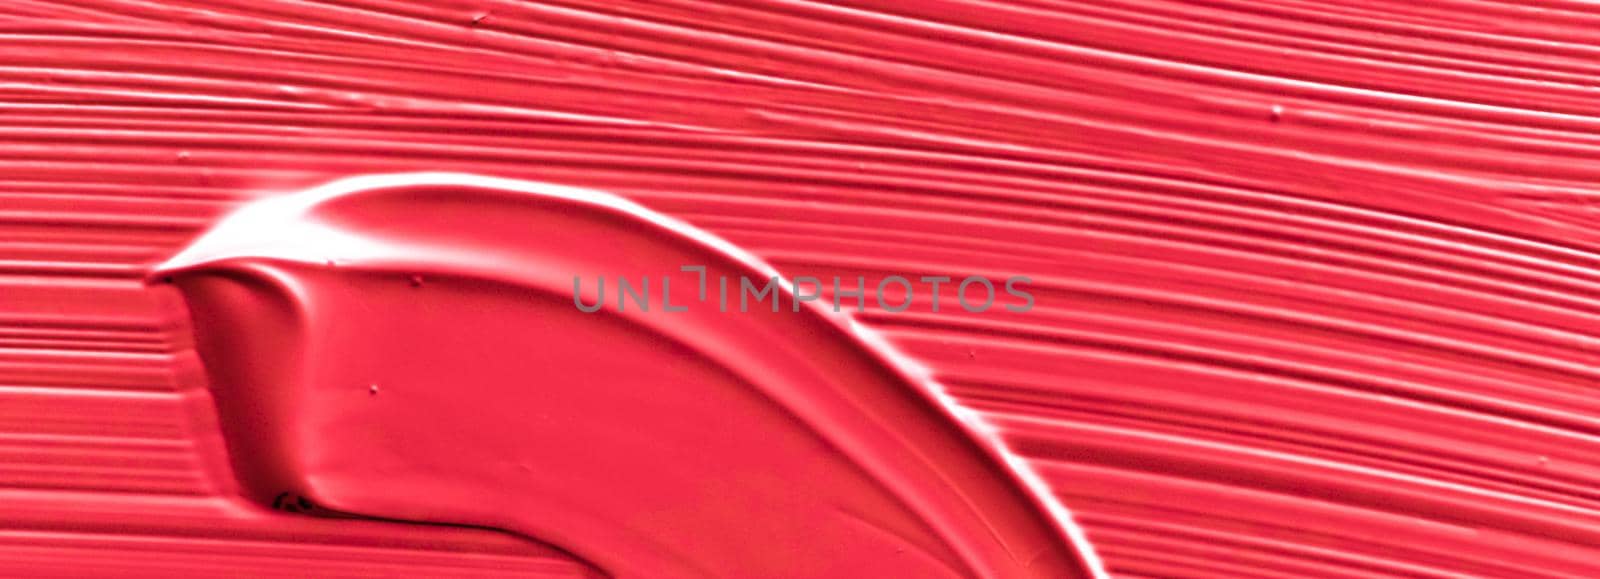 Art, branding and makeup concept - Cosmetics abstract texture background, red acrylic paint brush stroke, textured cream product as make-up backdrop for luxury beauty brand, holiday banner design